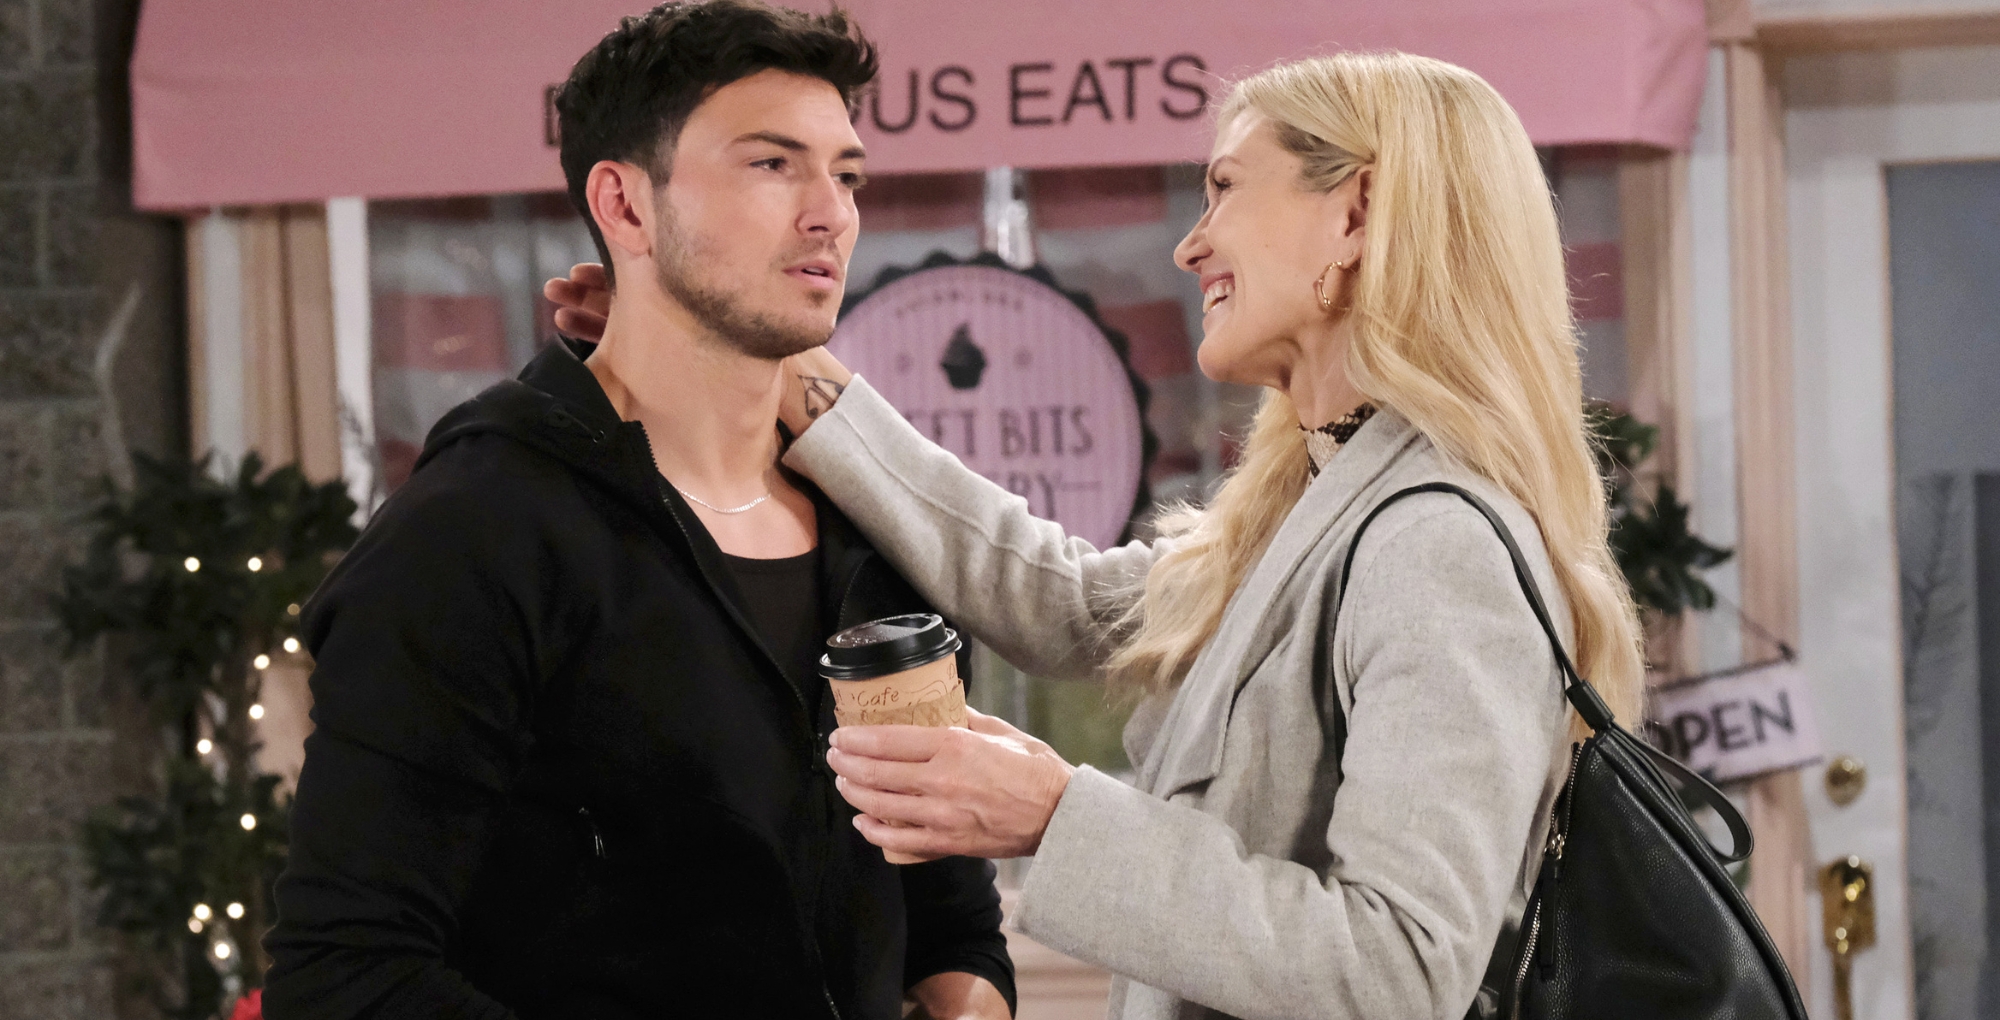 Kristen And Alex's Plan Is Doomed On Days of our Lives